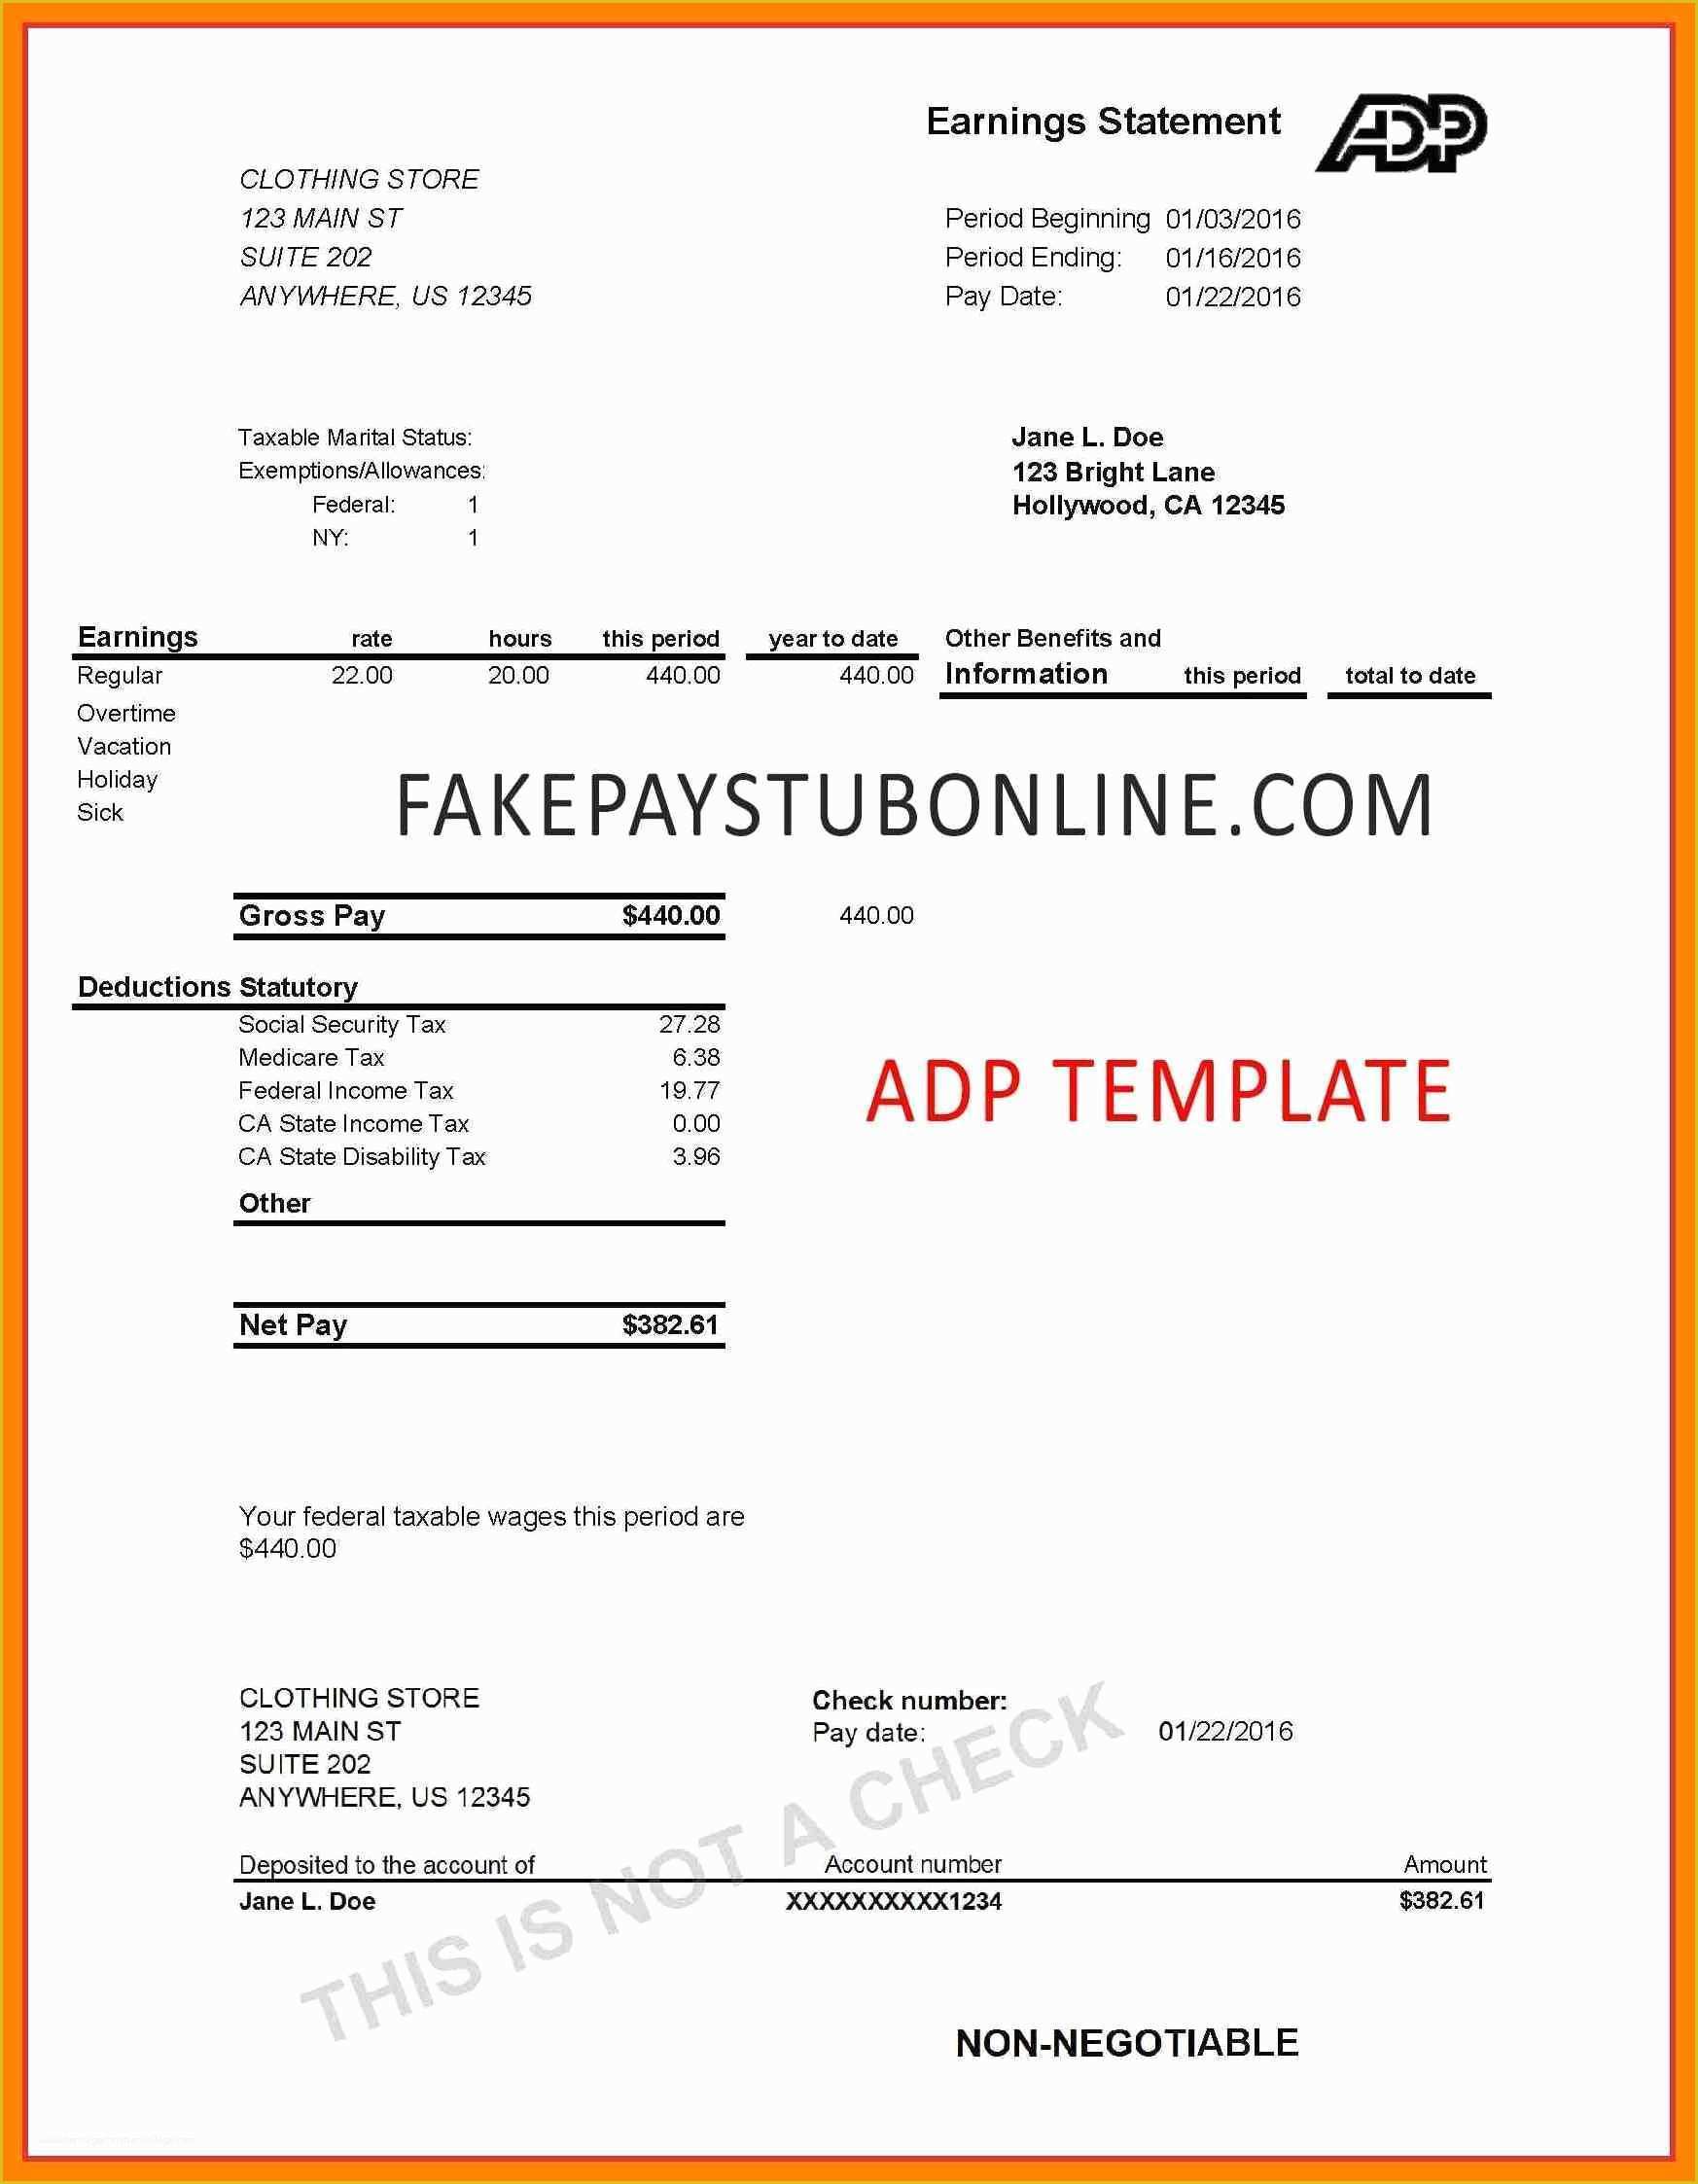 Free Pay Stub Template with Calculator Of Adp Payroll Stubs Free Pay Stub Template with Calculator